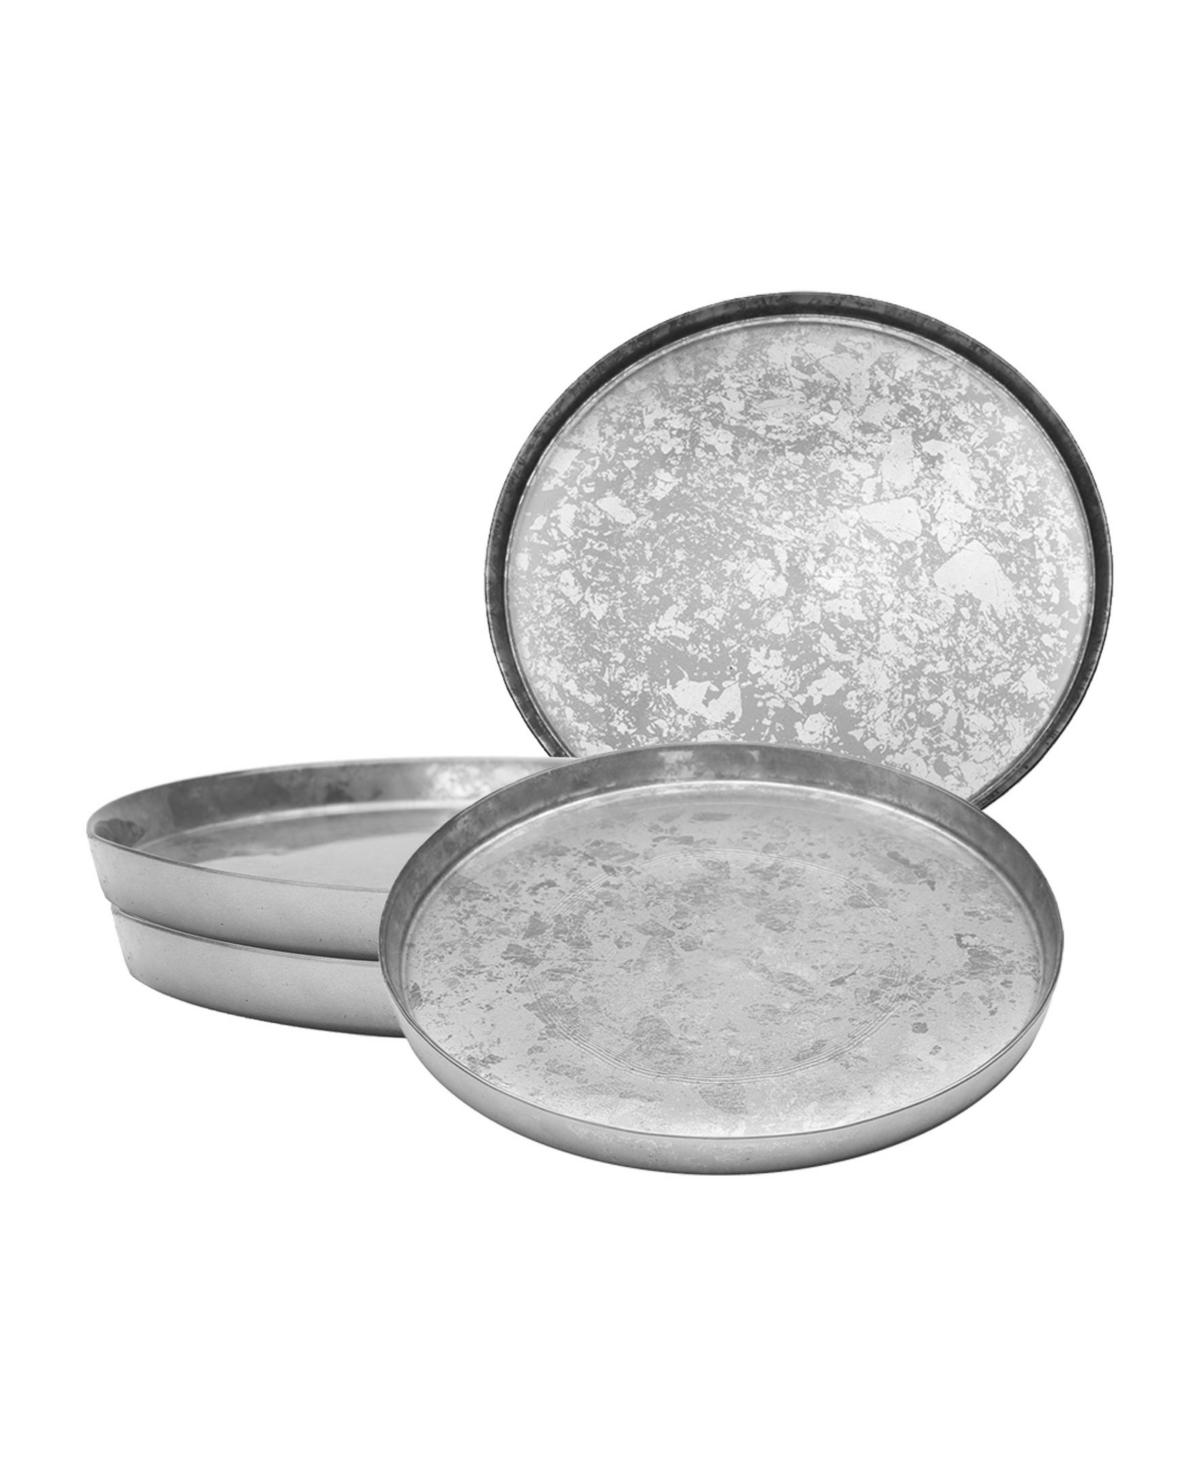 11" Silver Glitter Dinner Plates with Raised Rim 4 Piece Set, Service for 4 - Silver